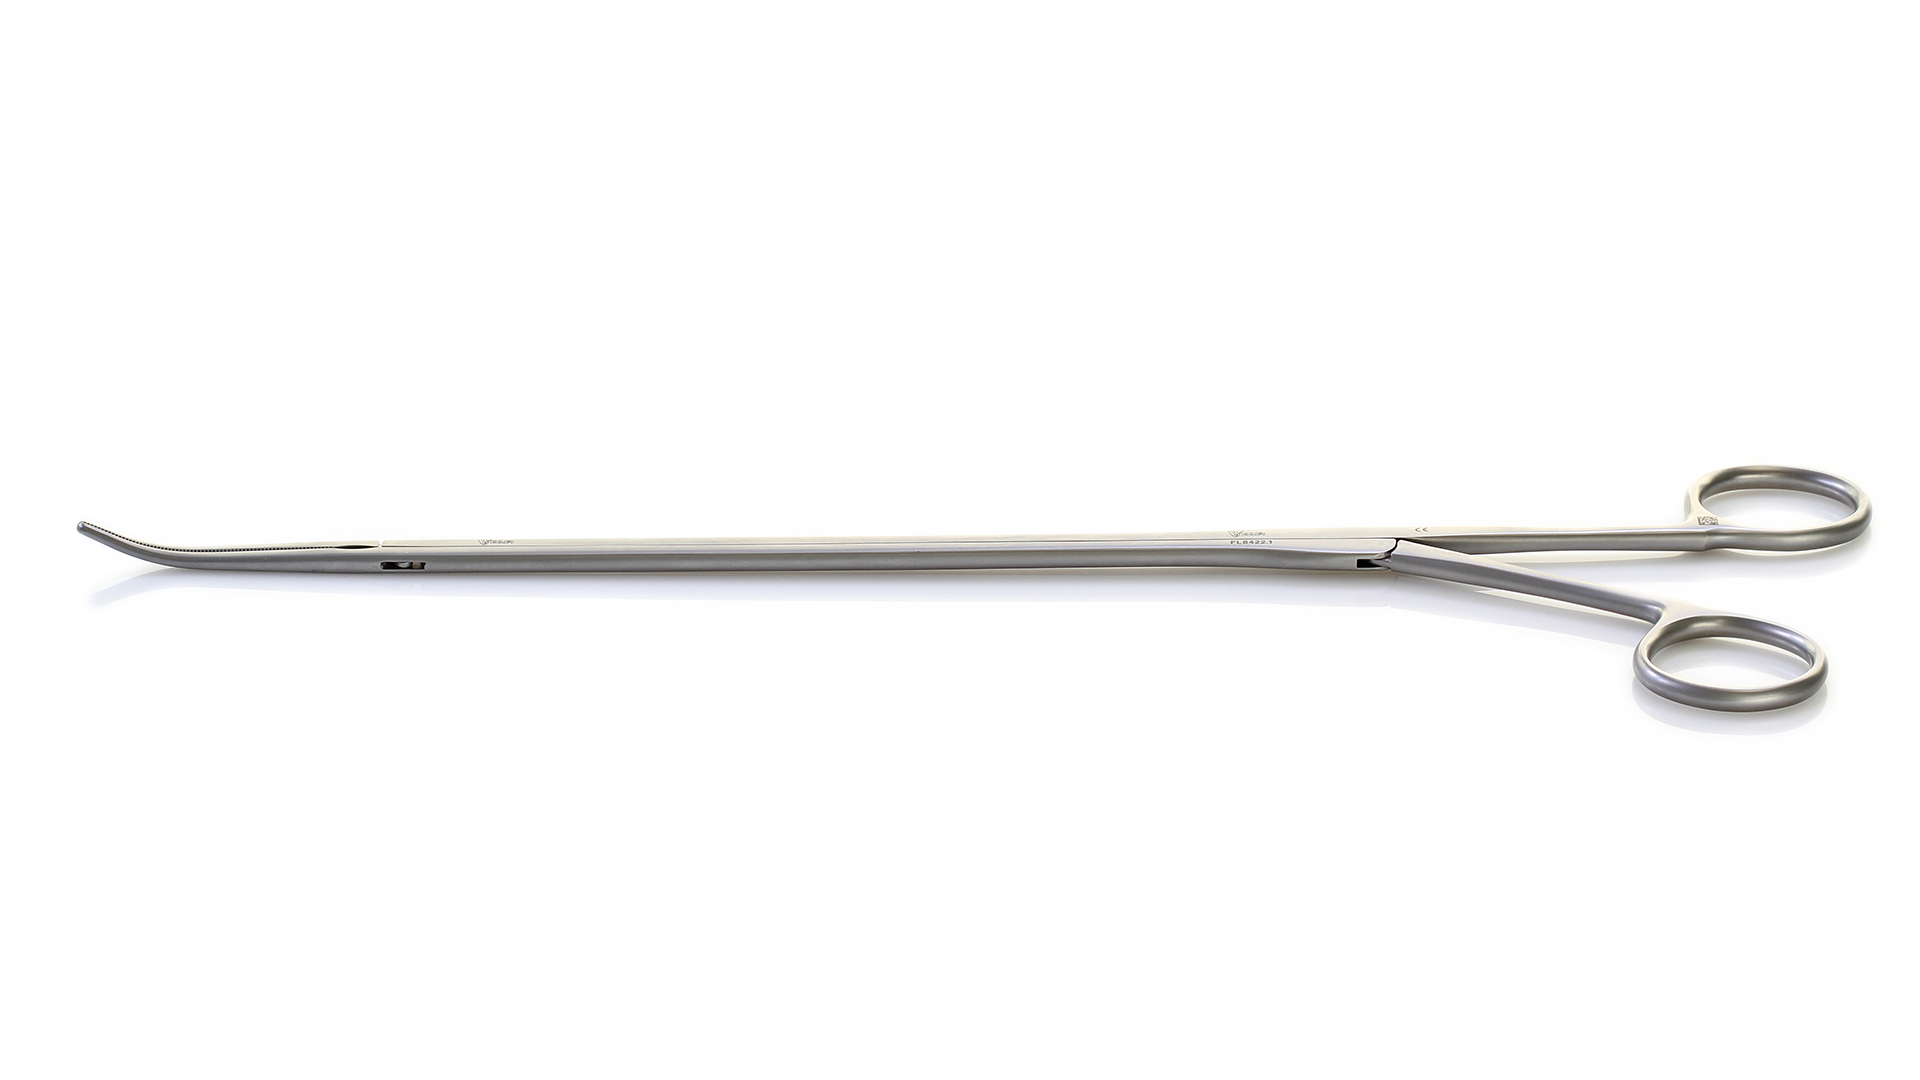 VATS Curved Dissector – Serrated jaws